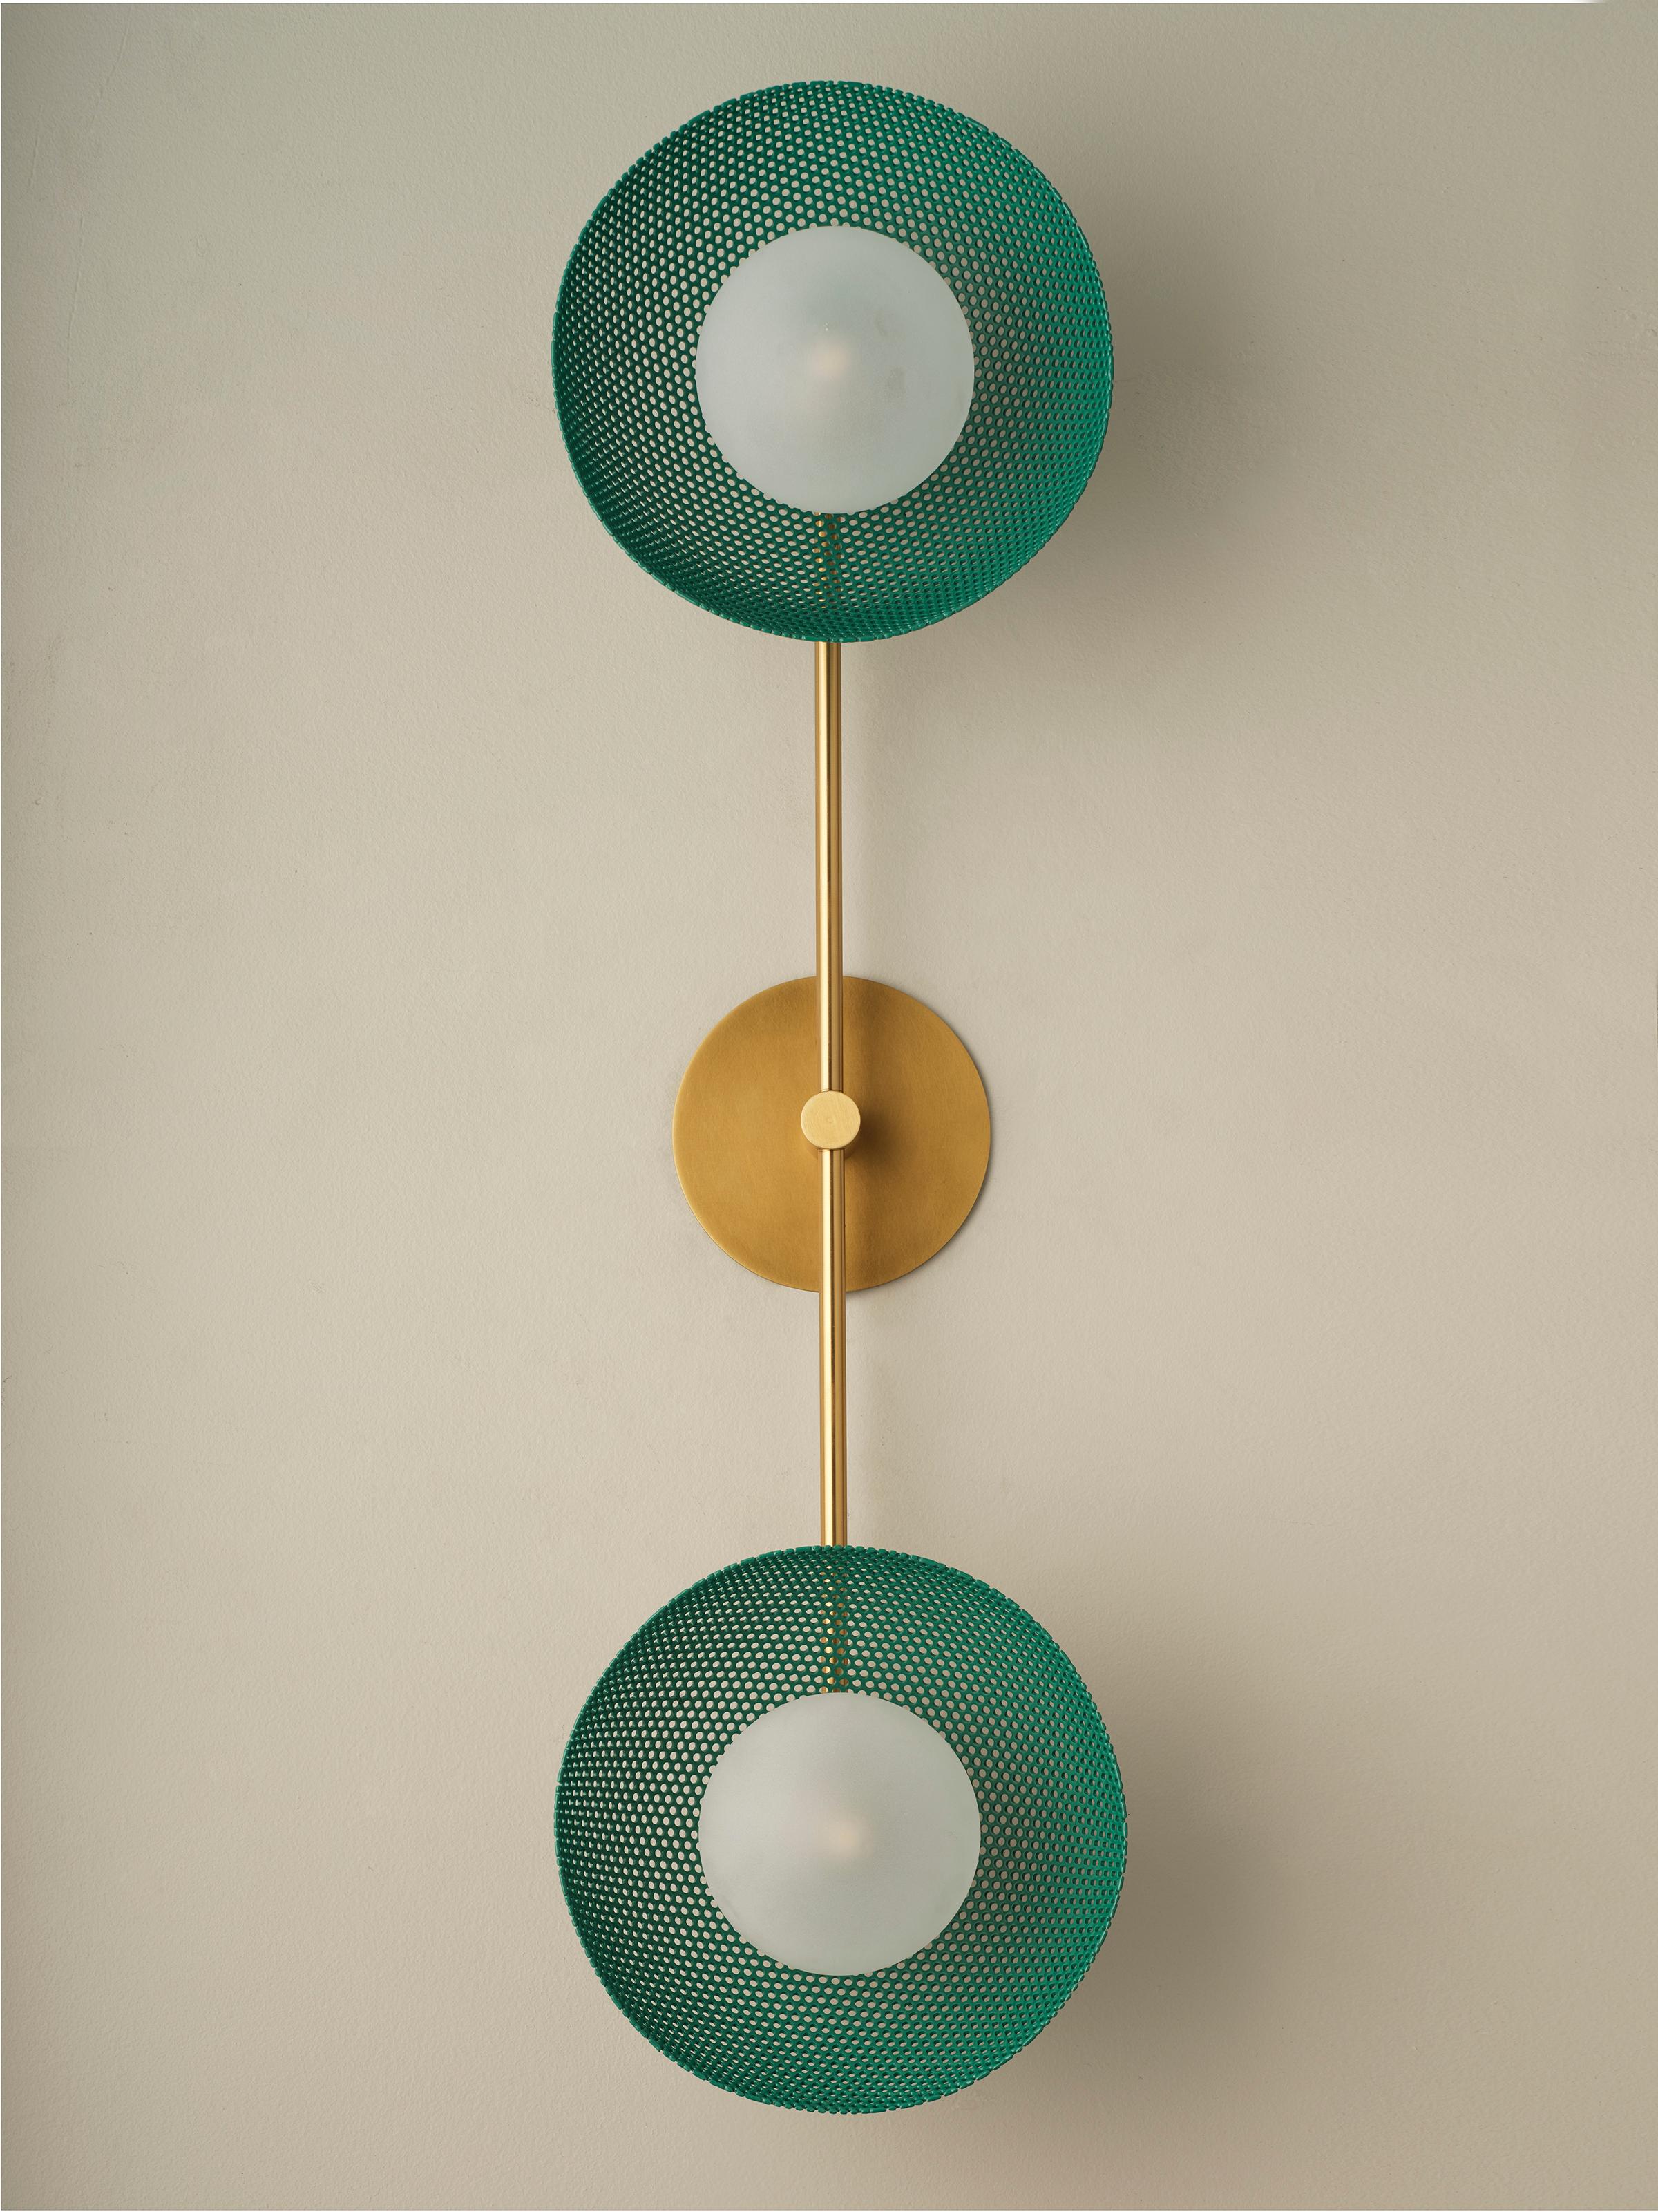 Bicentric Wall Sconce in Natural Brass & Green Enamel Mesh, Blueprint Lighting In Excellent Condition For Sale In New York, NY